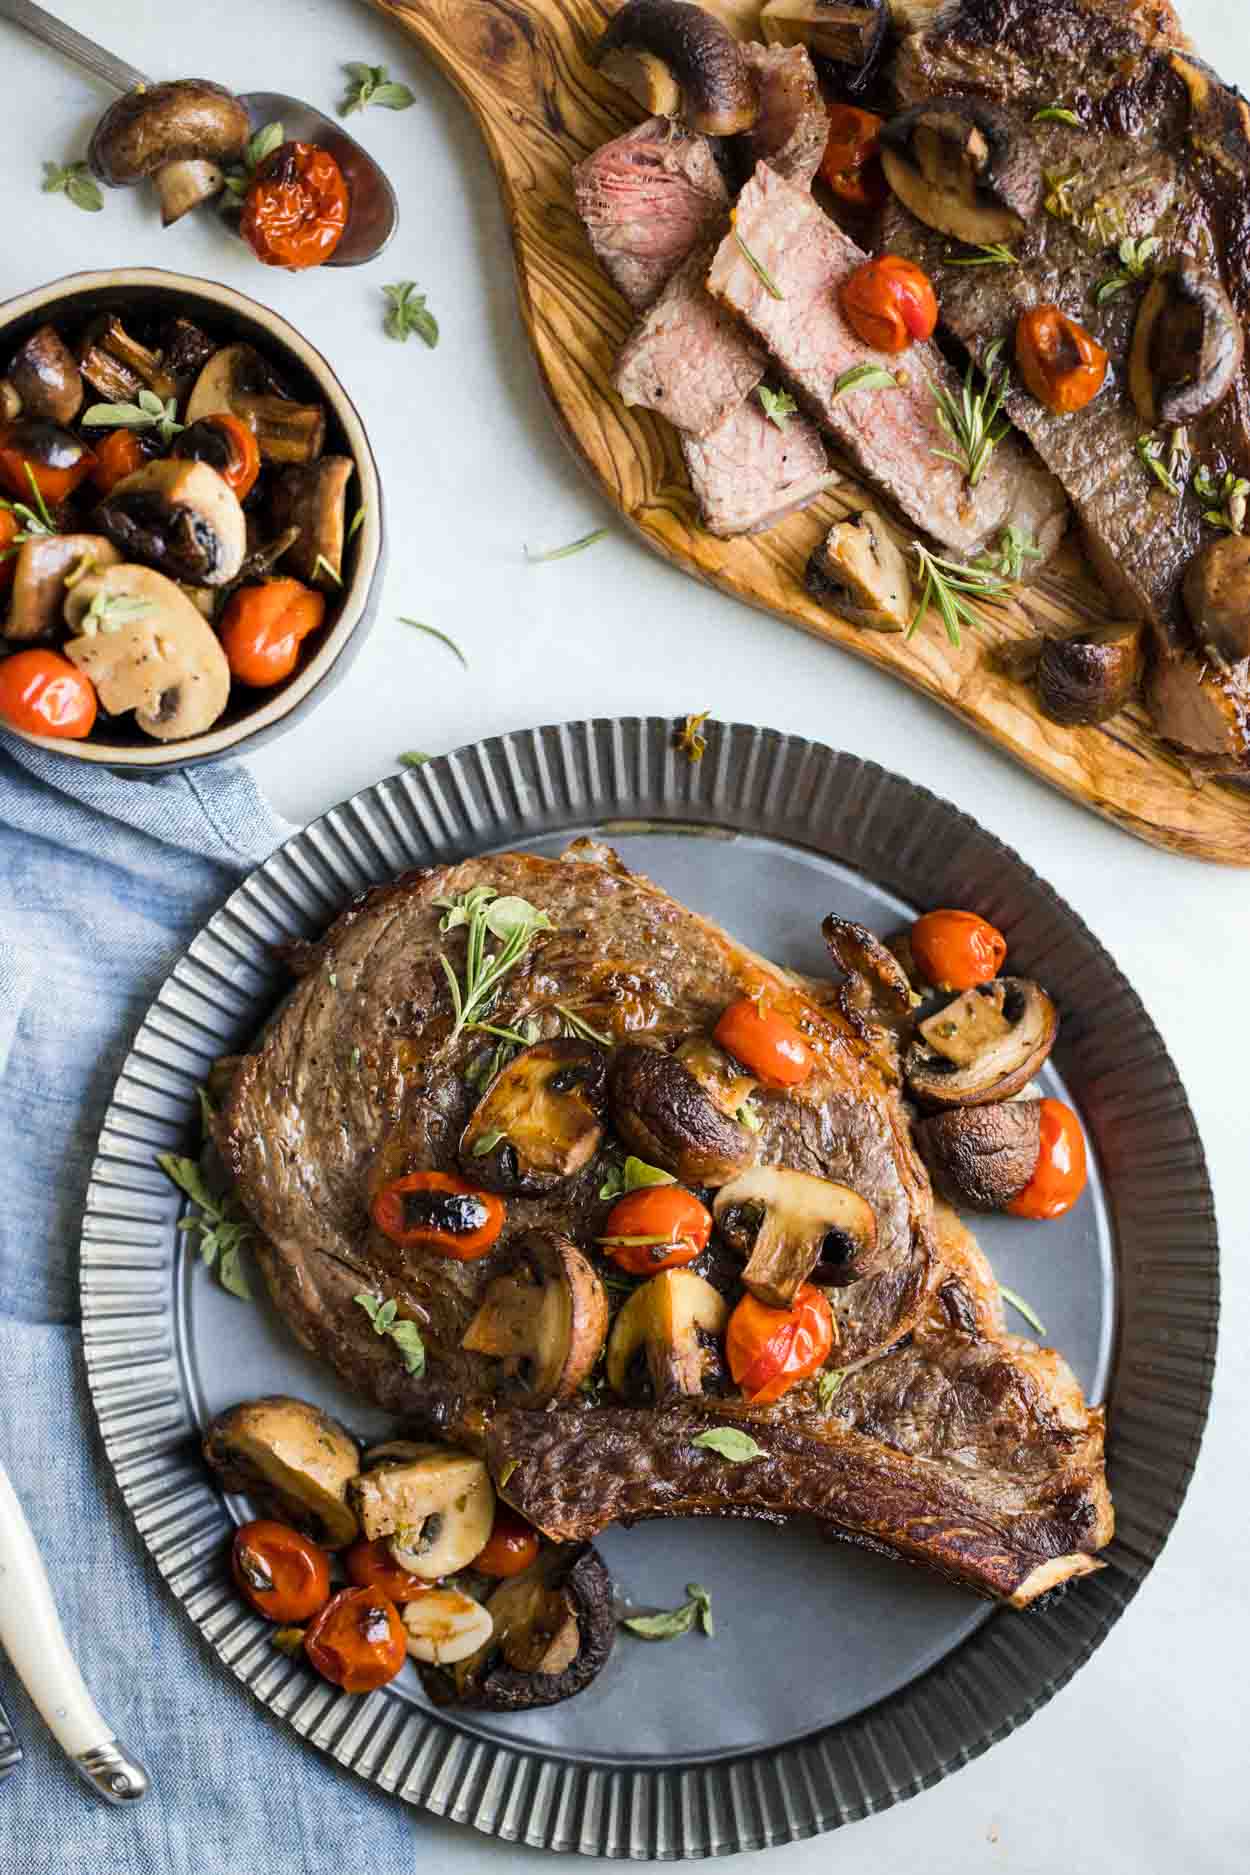 Steak, mushrooms, tomatoes and herbs on a tin plate with a bowl of mushrooms and tomatoes next to it and sliced meat on a cutting board, on top of a white background 